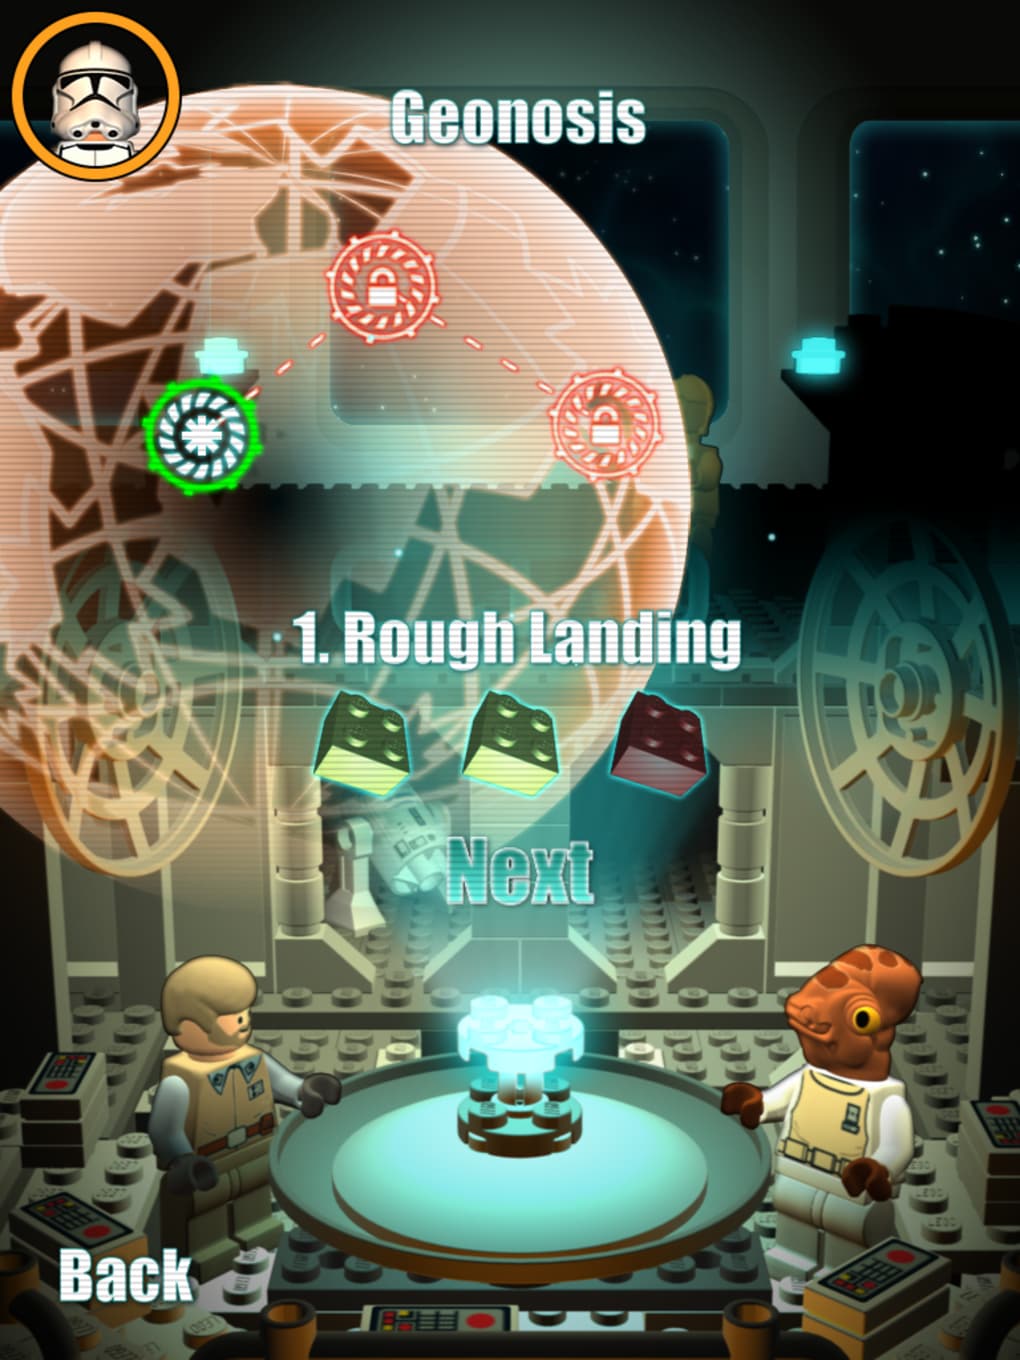 LEGO® Star Wars™ Microfighters APK for Android Download